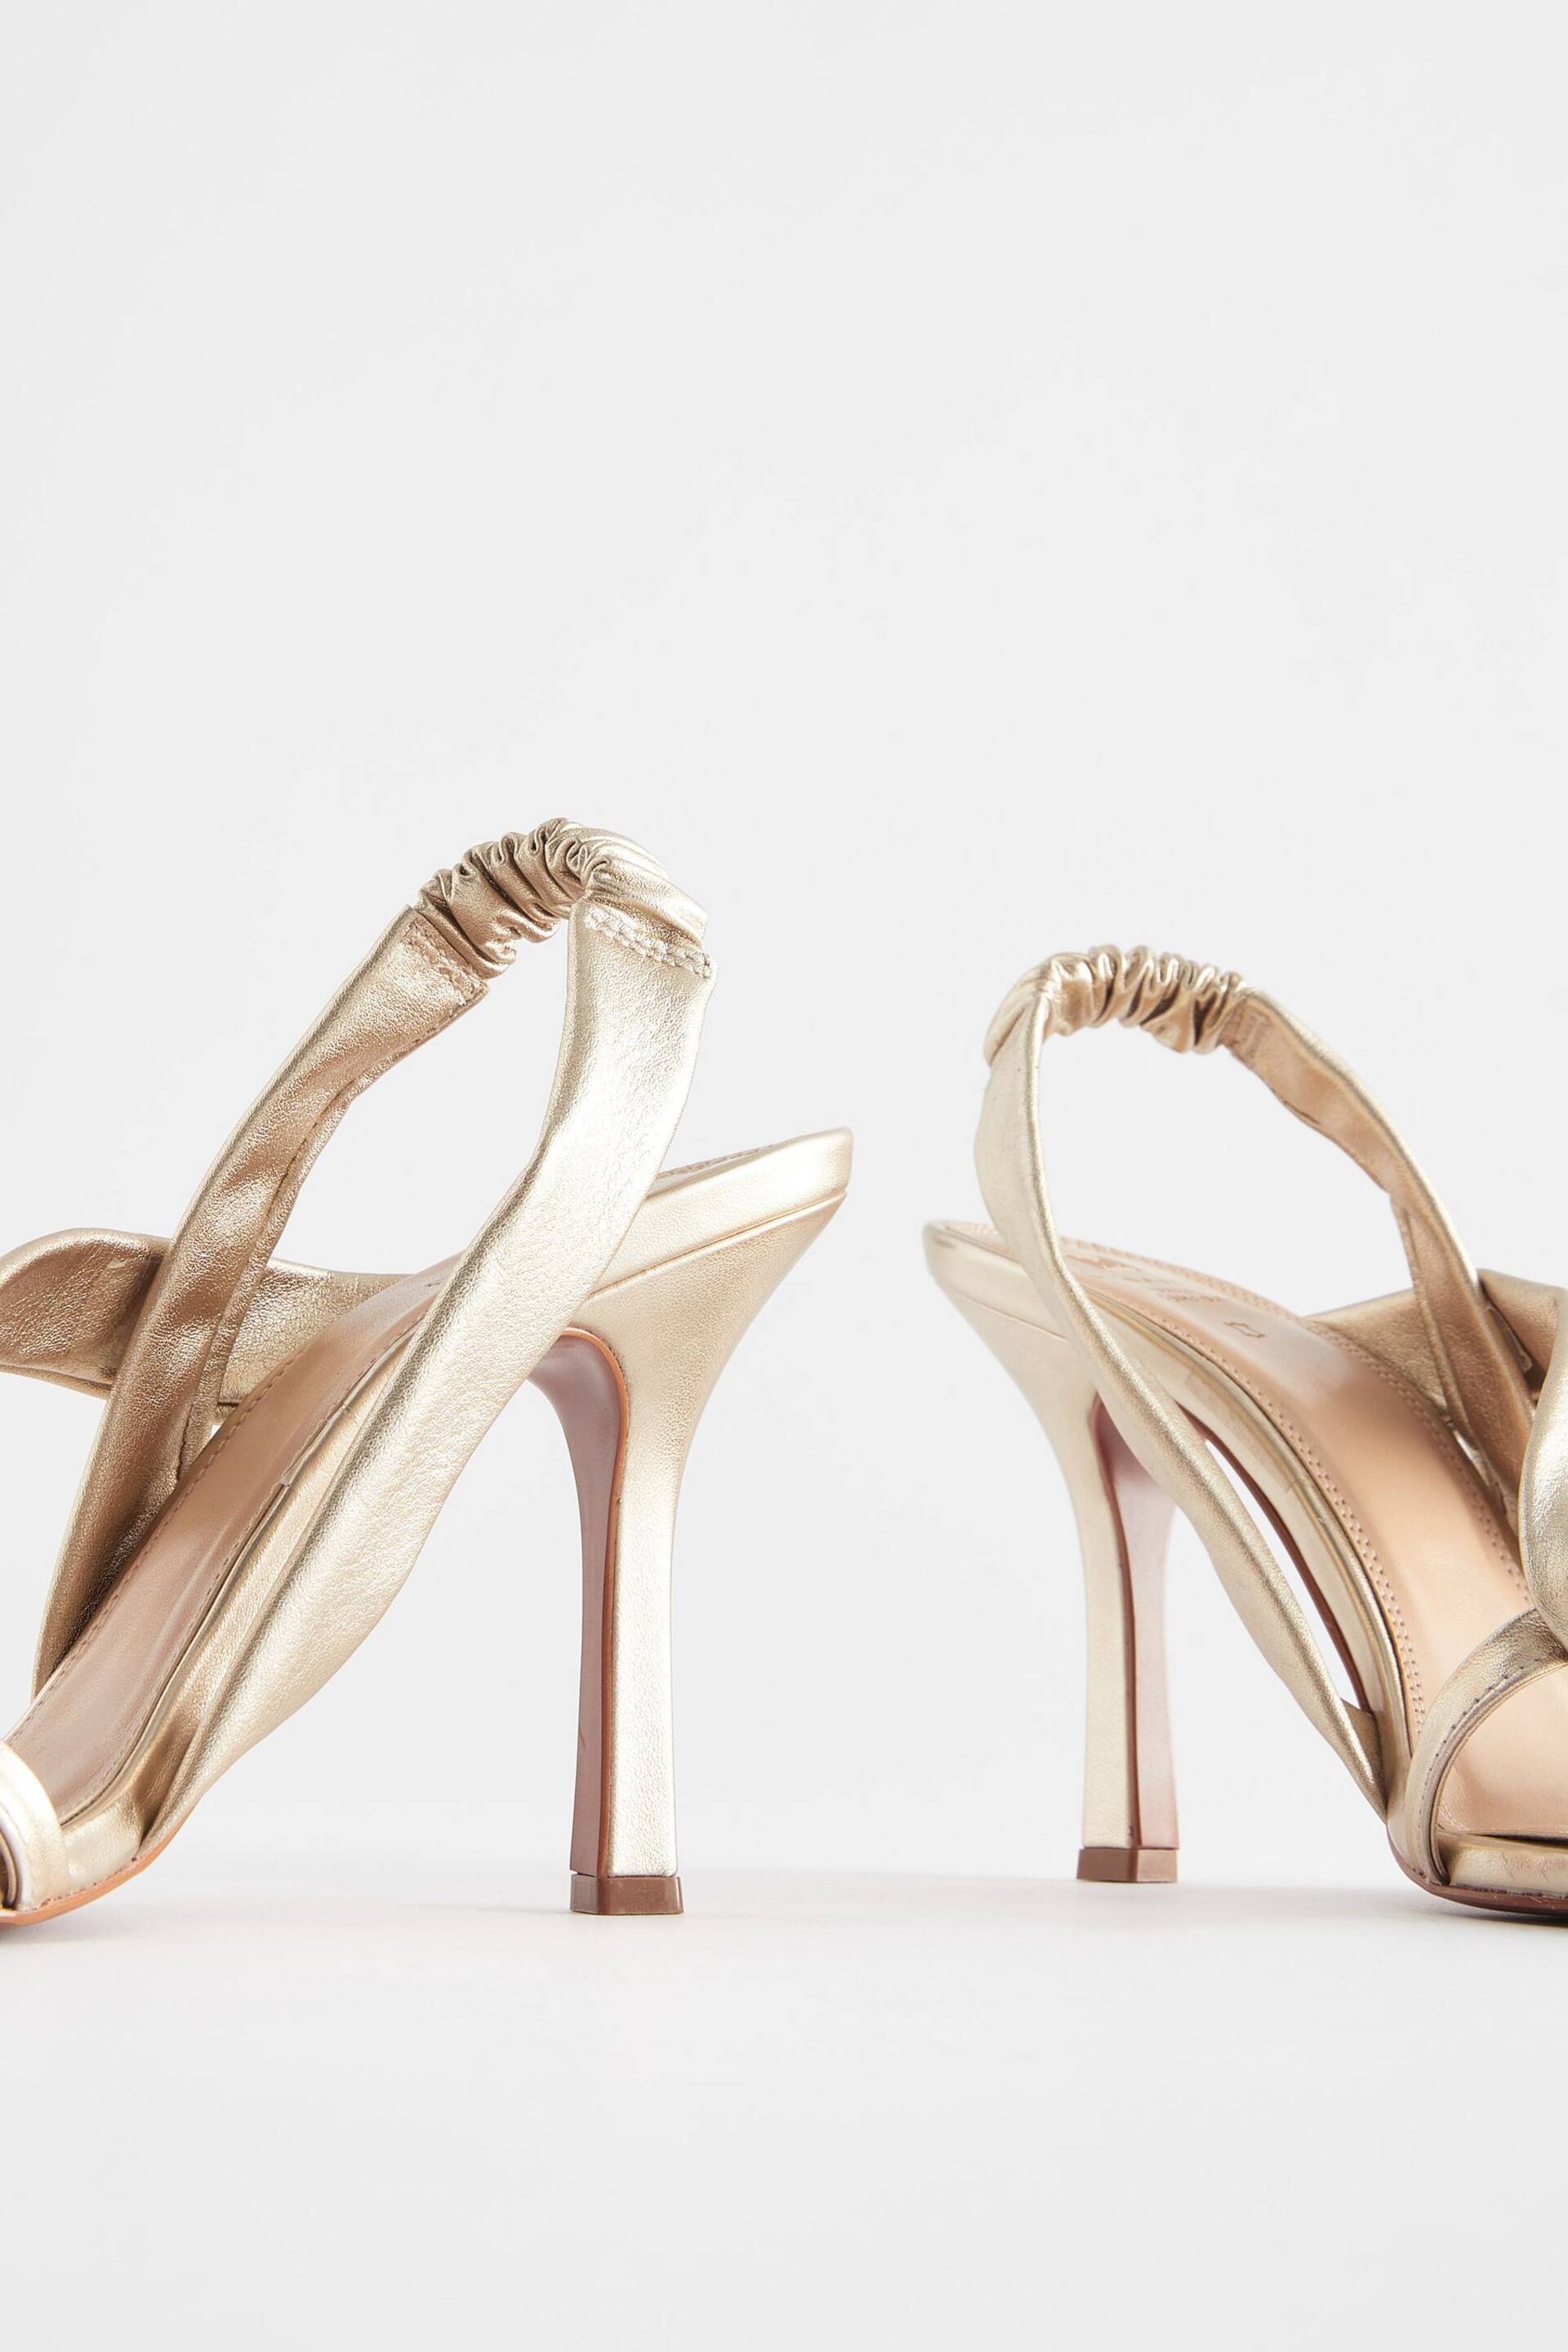 Gold Signature Leather Asymmetric Sandals - Image 7 of 9